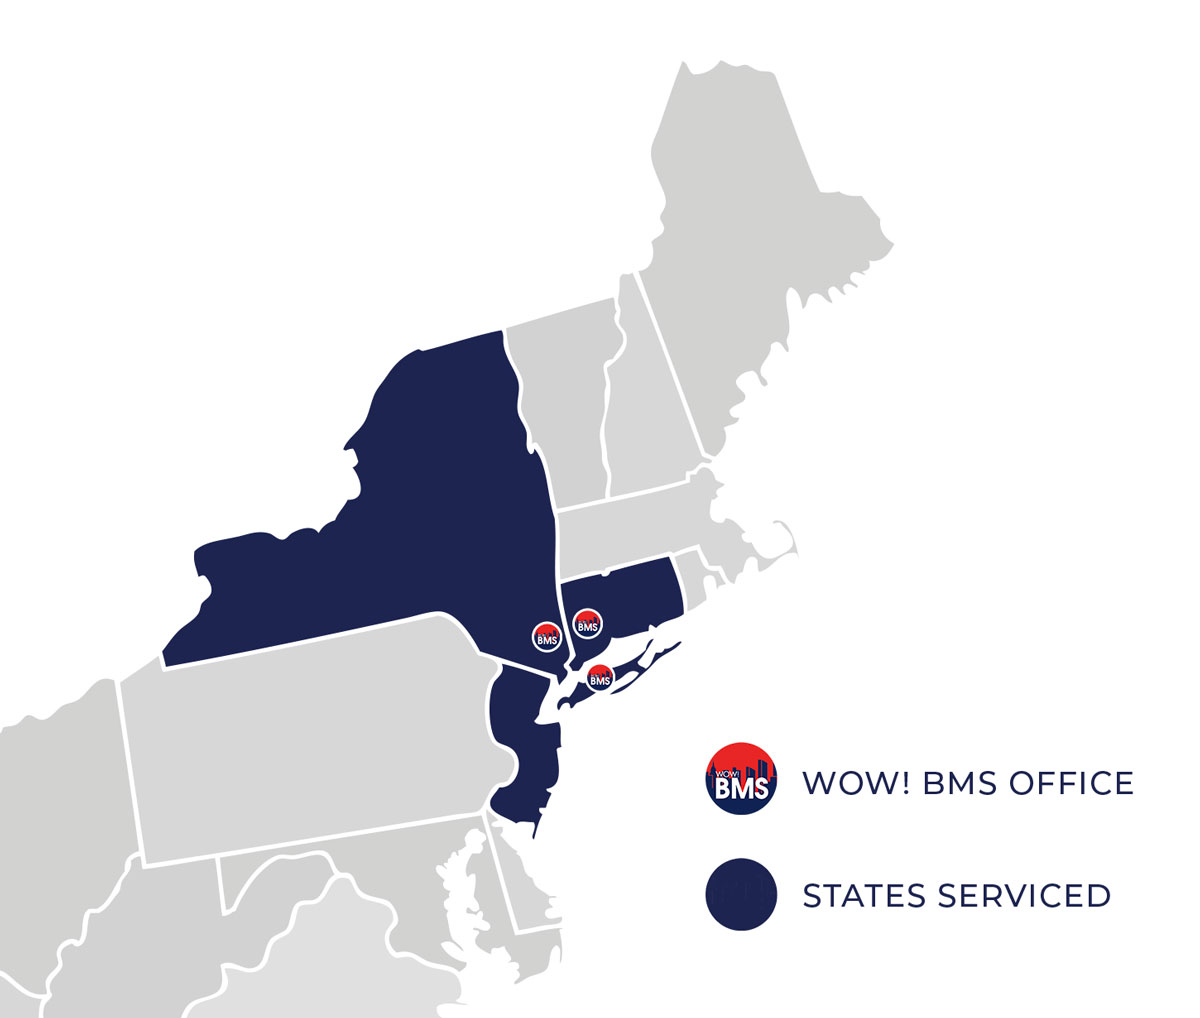 Map of Northeast USA with New York, New Jersey, and Connecticut colored in dark blue and the WOW! BMS logo in the 3 office locations.